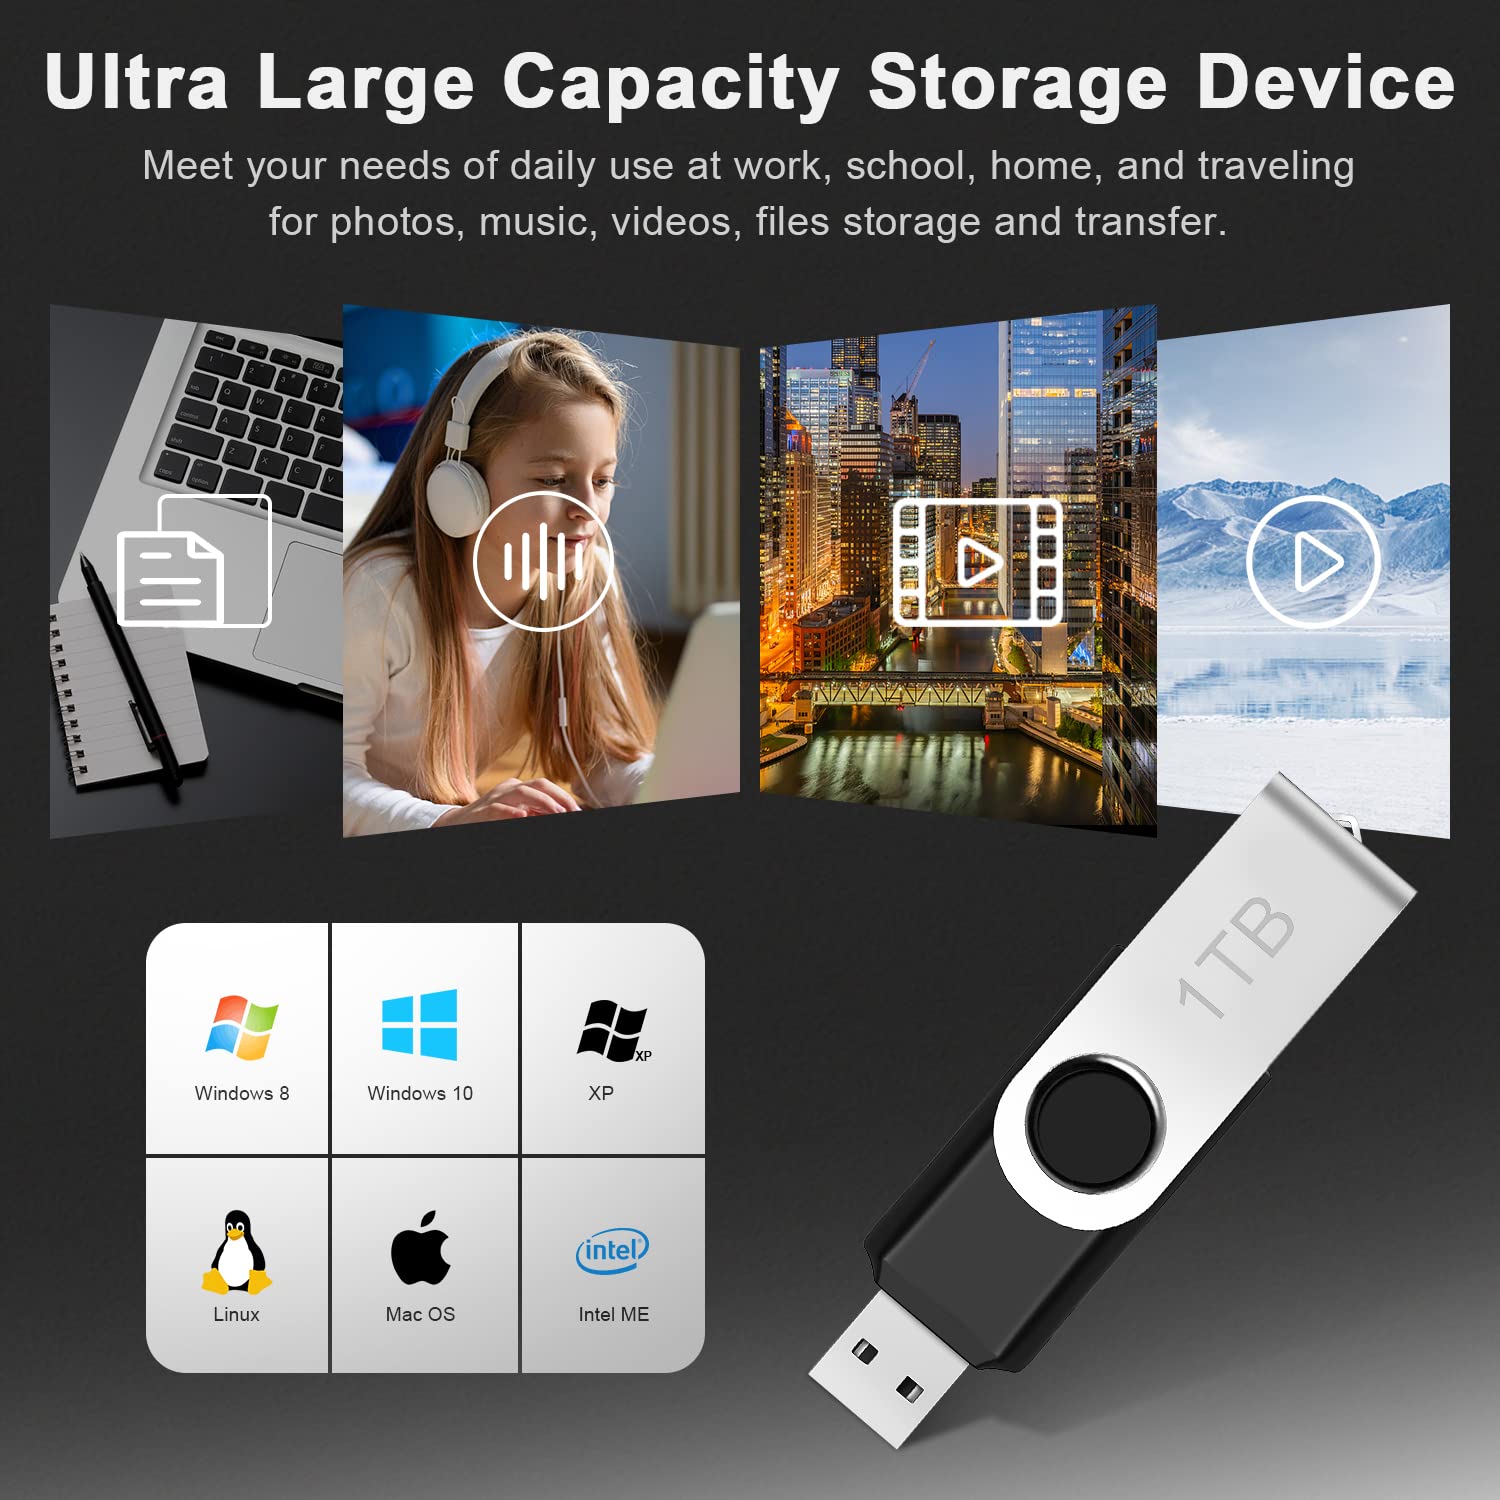 1TB USB Flash Drive 3.0, SXINDE USB 3.0 Flash Memory Stick 1000GB for PC/Laptop, Ultra High-Speed USB 3.0 Data Storage Drive 1000GB - Read Speeds up to 60Mb/s, 1TB Thumb Drive with Rotated Design